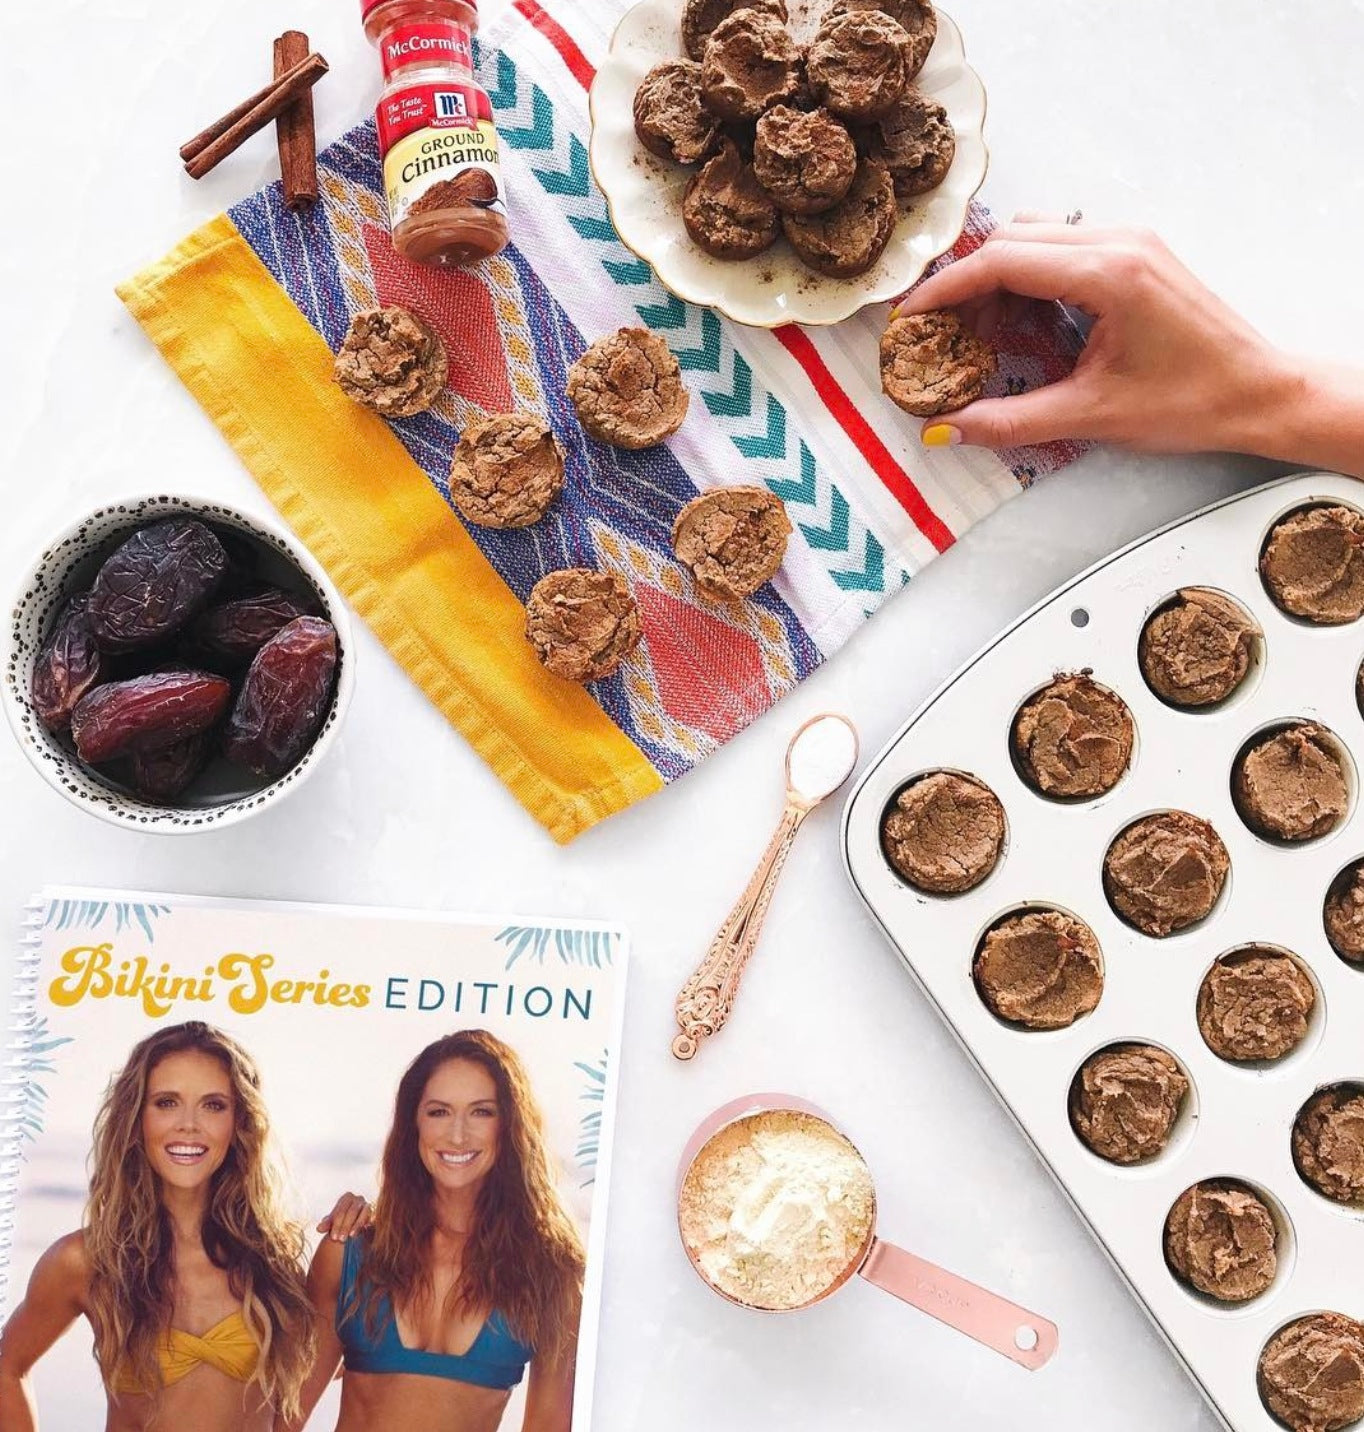 These Bikini Series Snickerdoodle Muffins Are About to be Your Go-To Treat!